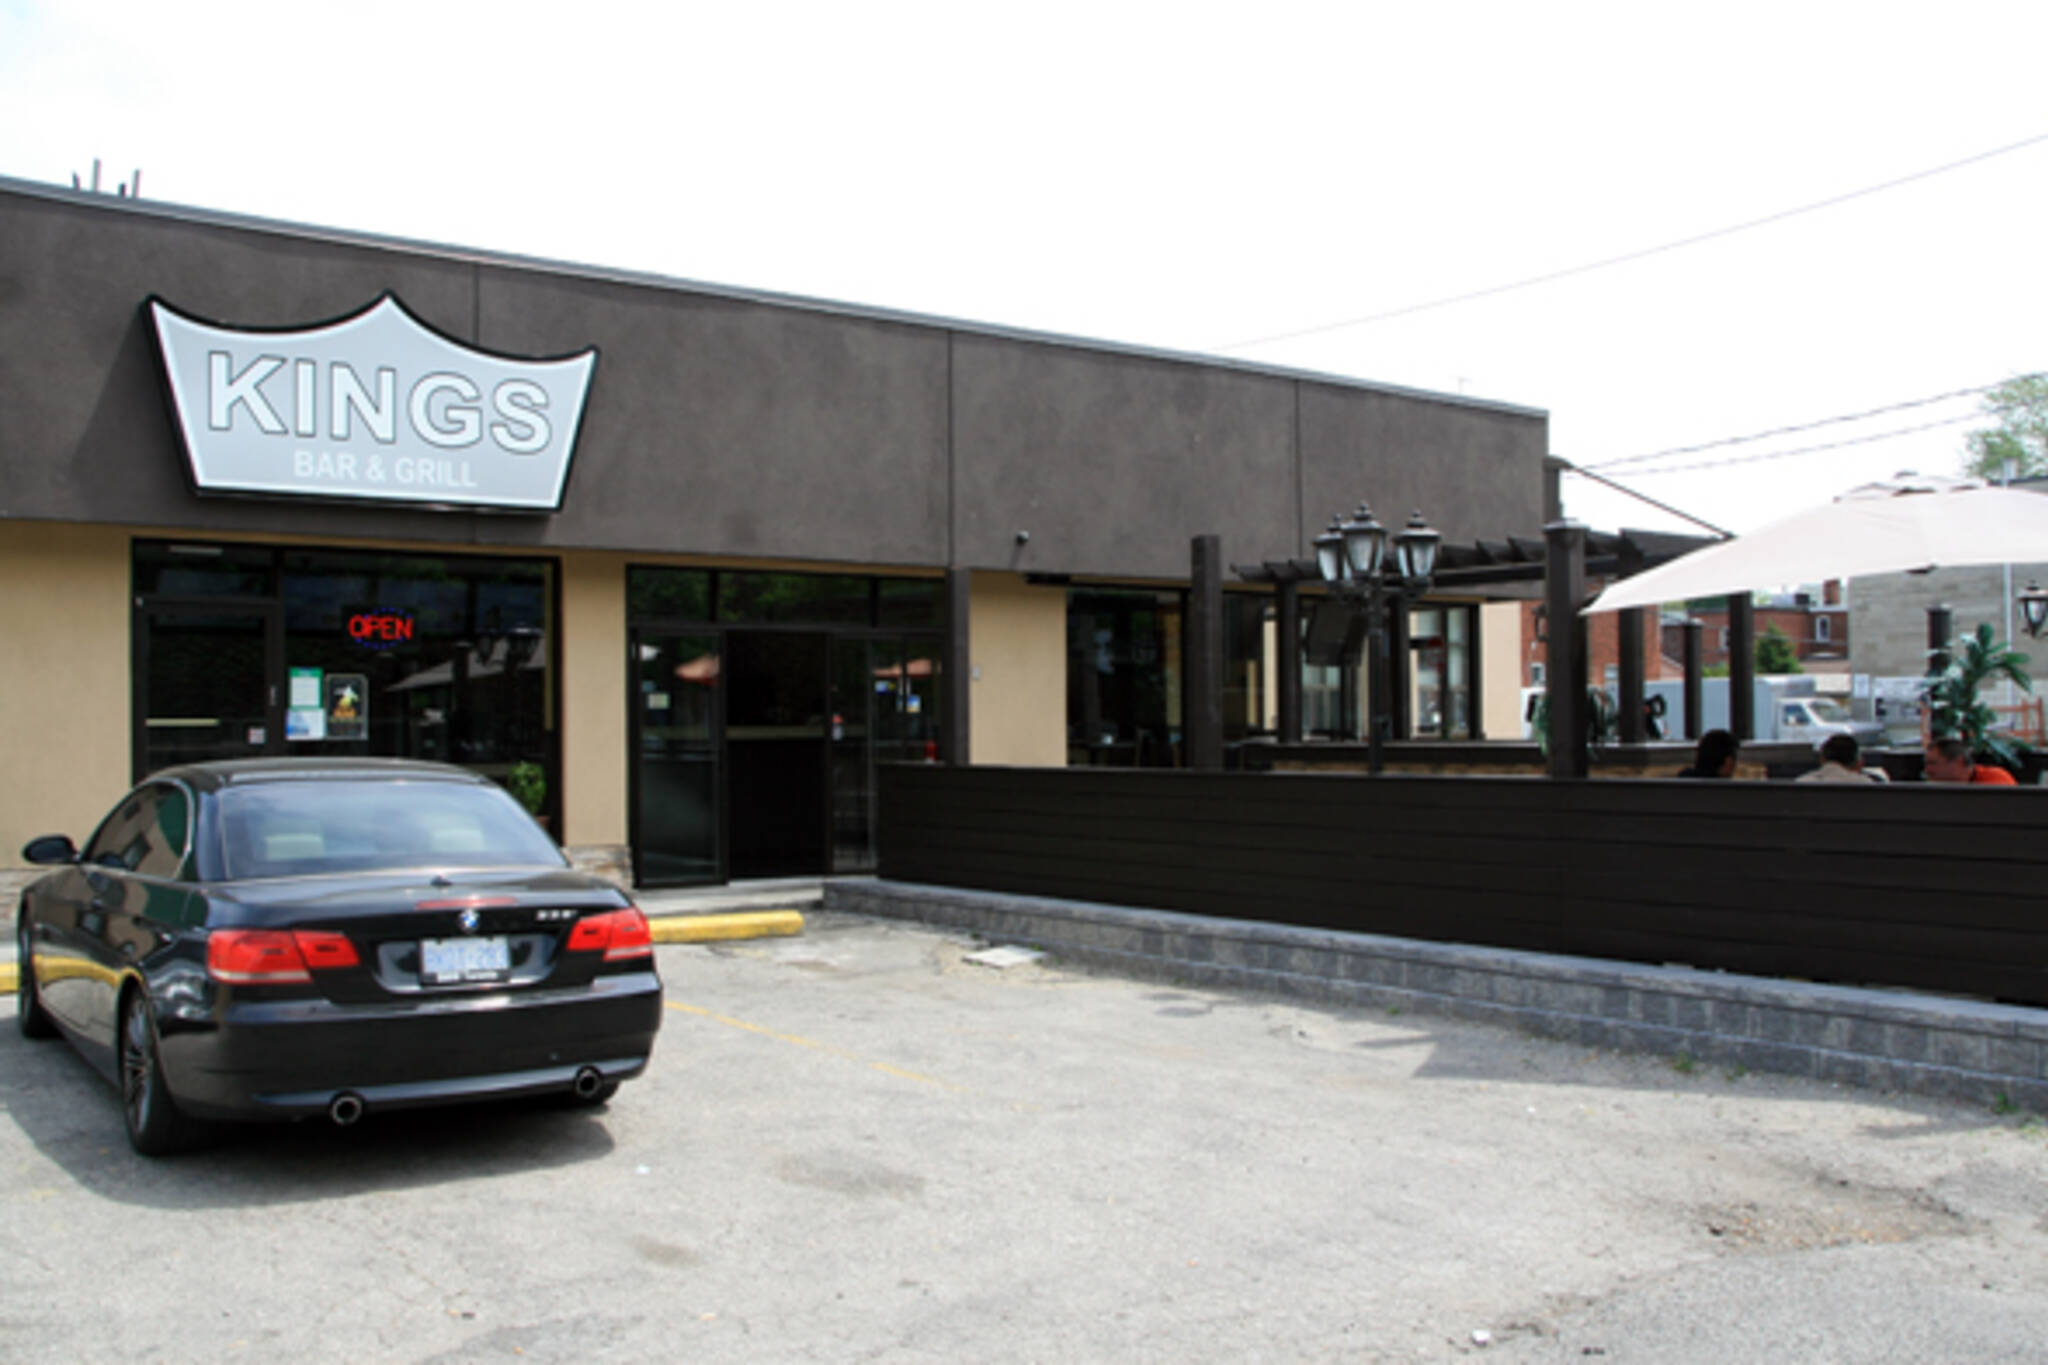 King's Bar & Grill